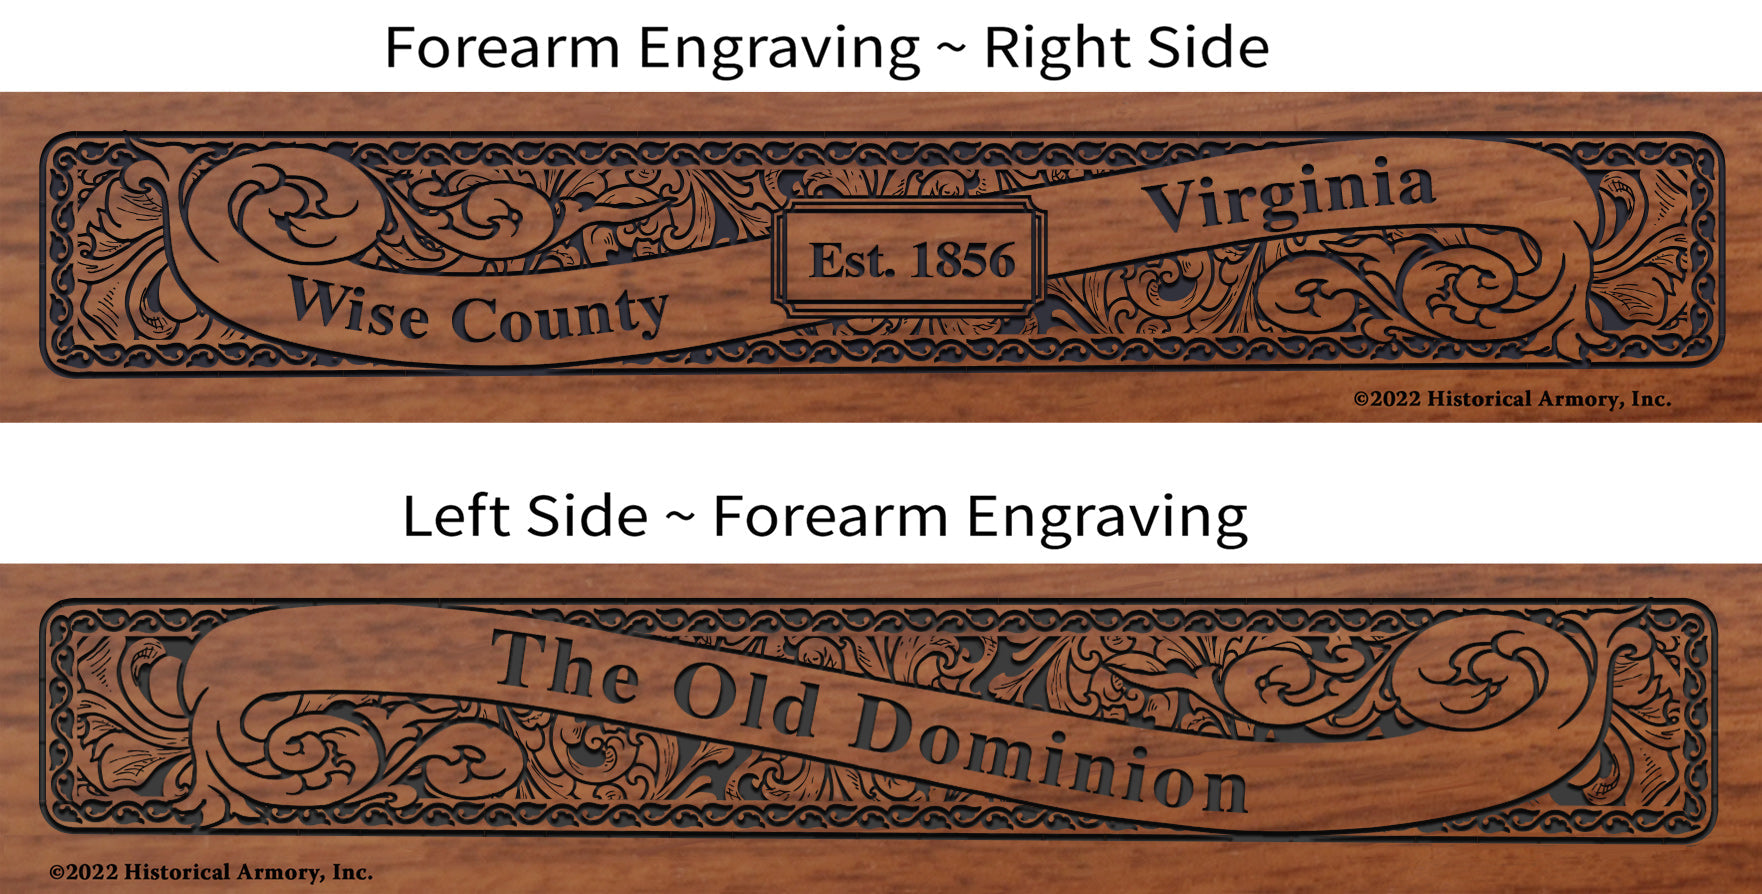 Wise County Virginia Engraved Rifle Forearm